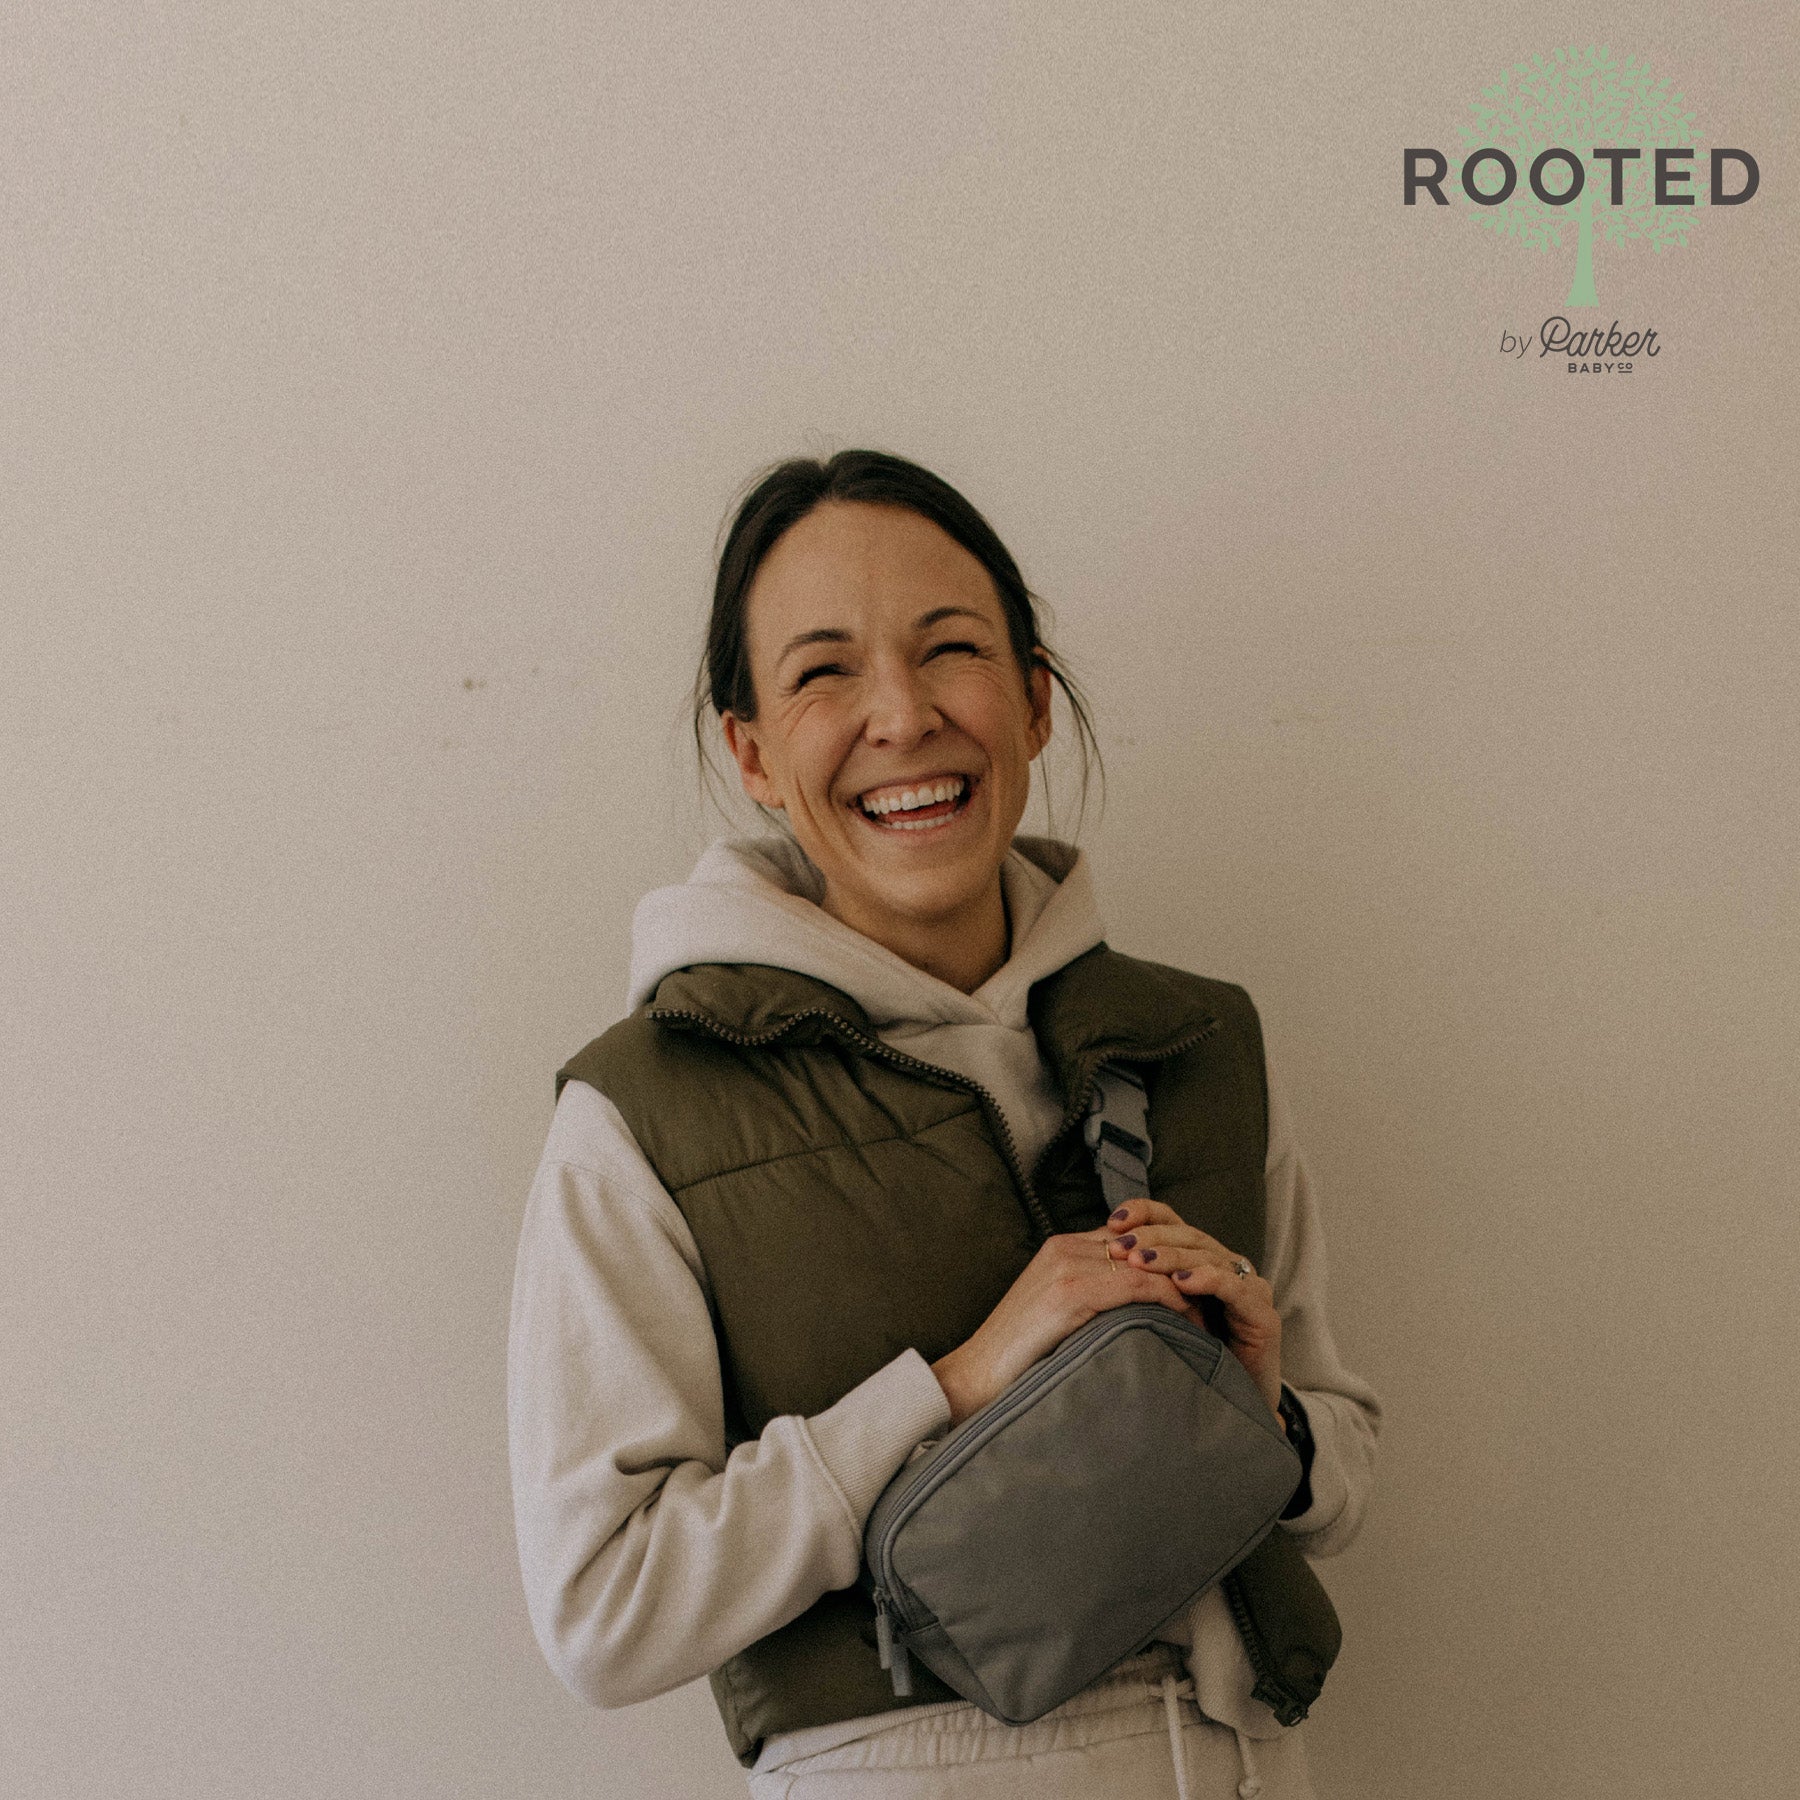 Women Supporting Women: Our Co-Founder Kirsten Shares Why She Started Rooted